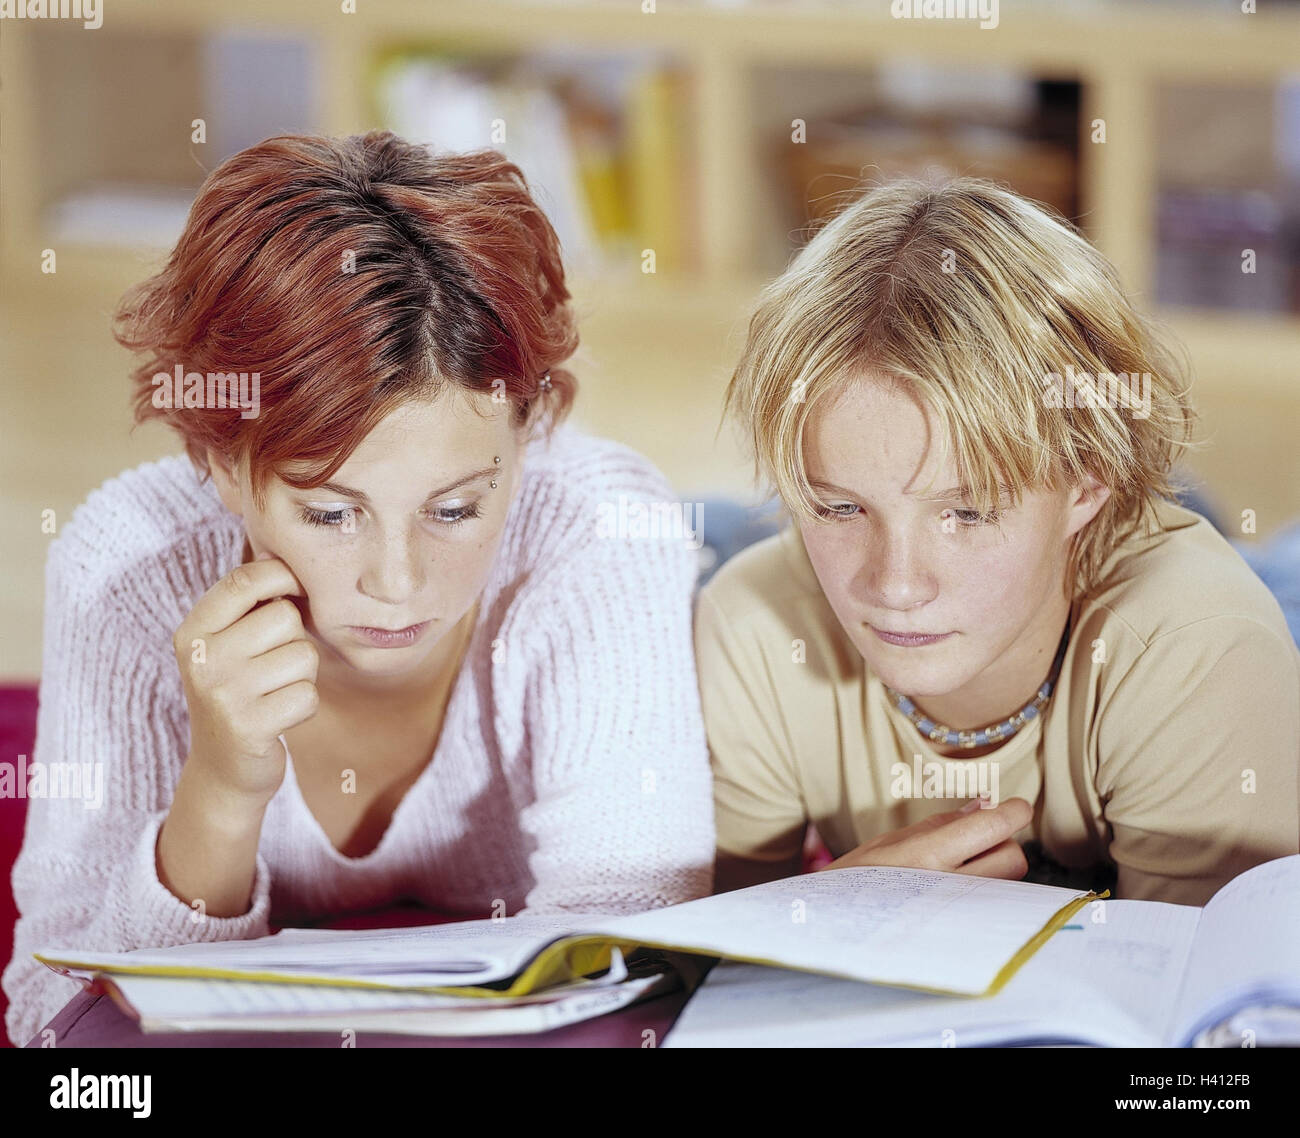 Friends Floor Lie Learn Bases Model Released Inside At Home Stock Photo Alamy